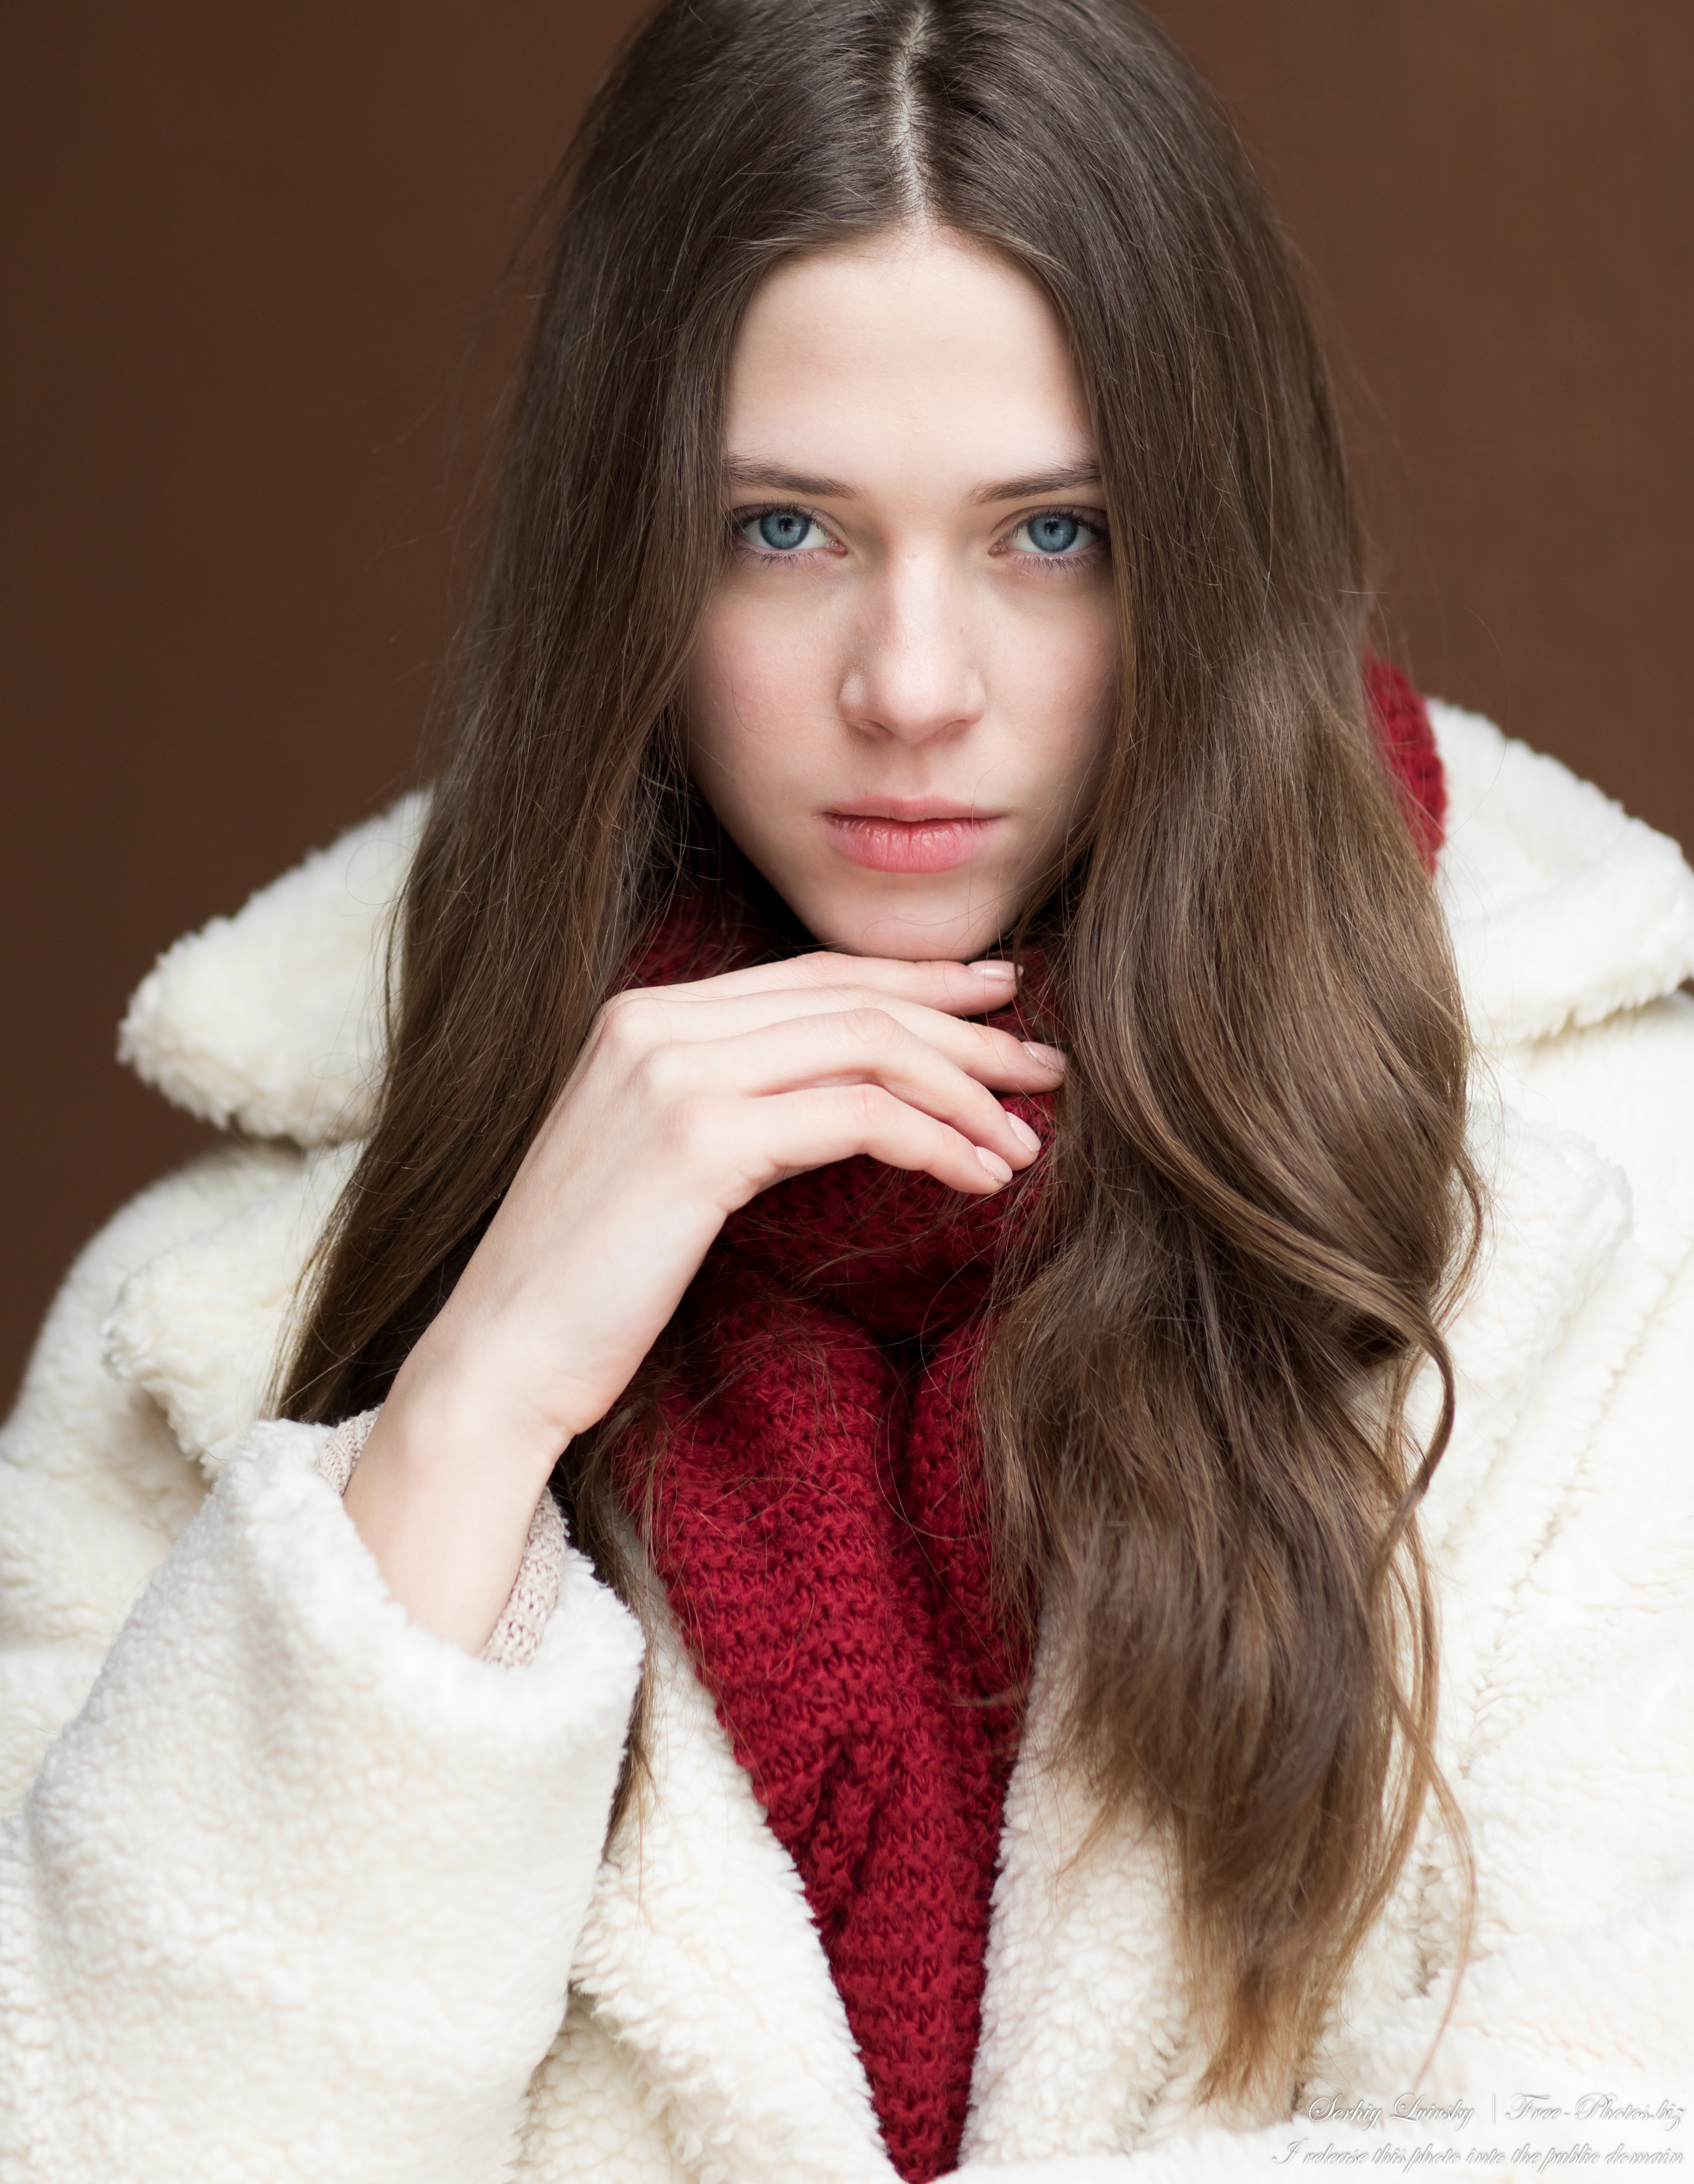 sophia_a_17-year-old_girl_with_blue_eyes_photographed_by_serhiy_lvivsky_in_jan_2022_01